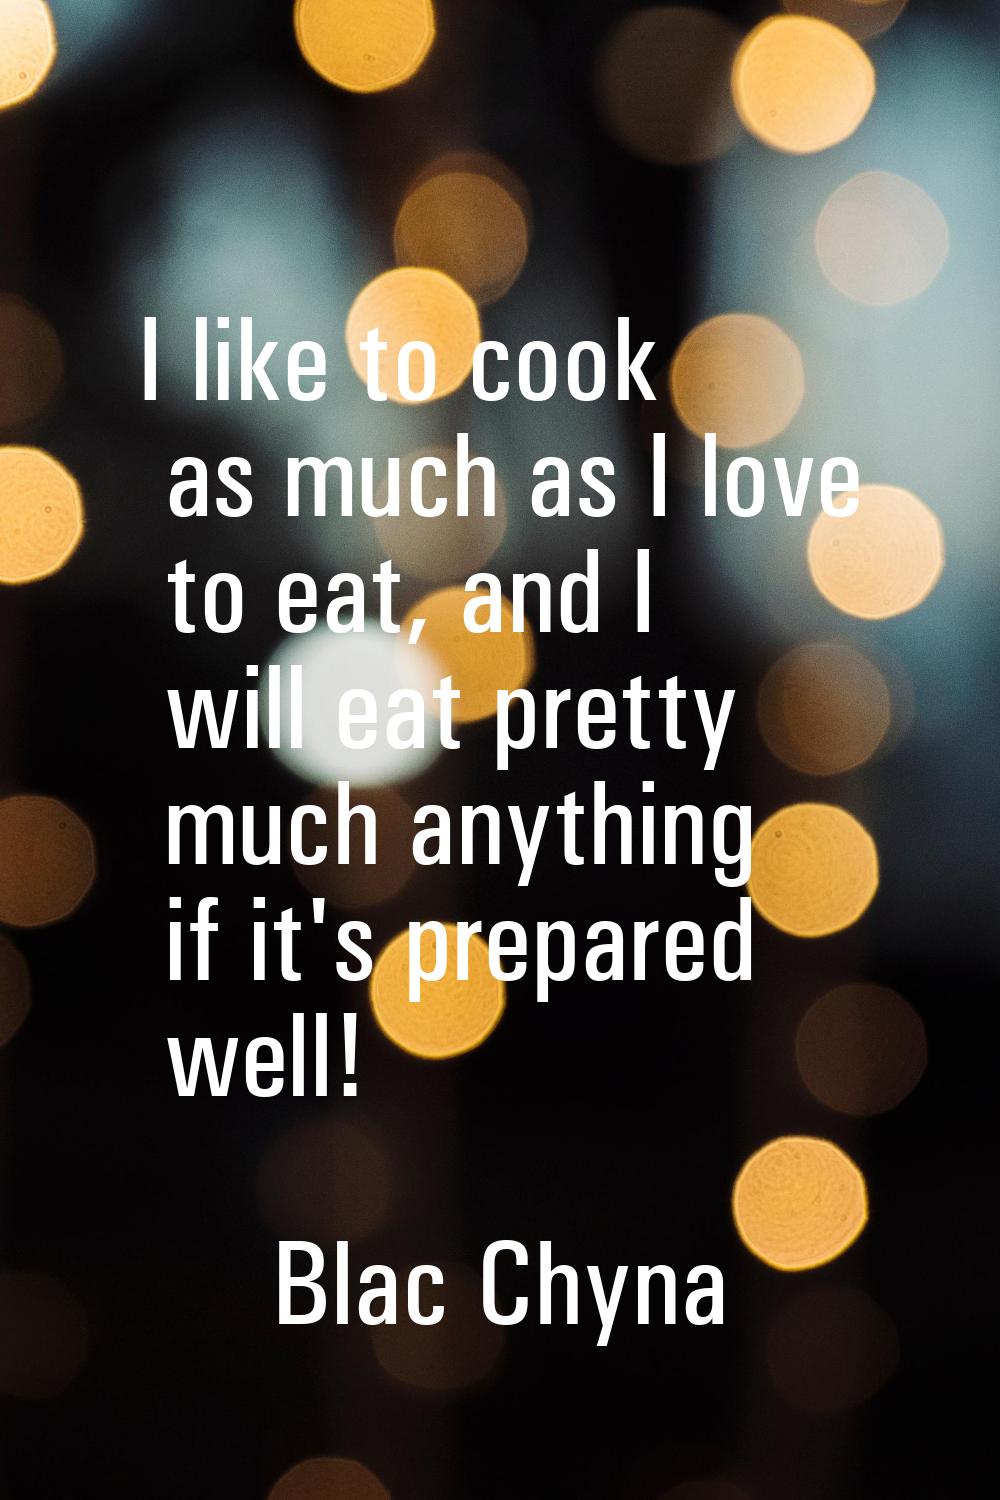 I like to cook as much as I love to eat, and I will eat pretty much anything if it's prepared well!